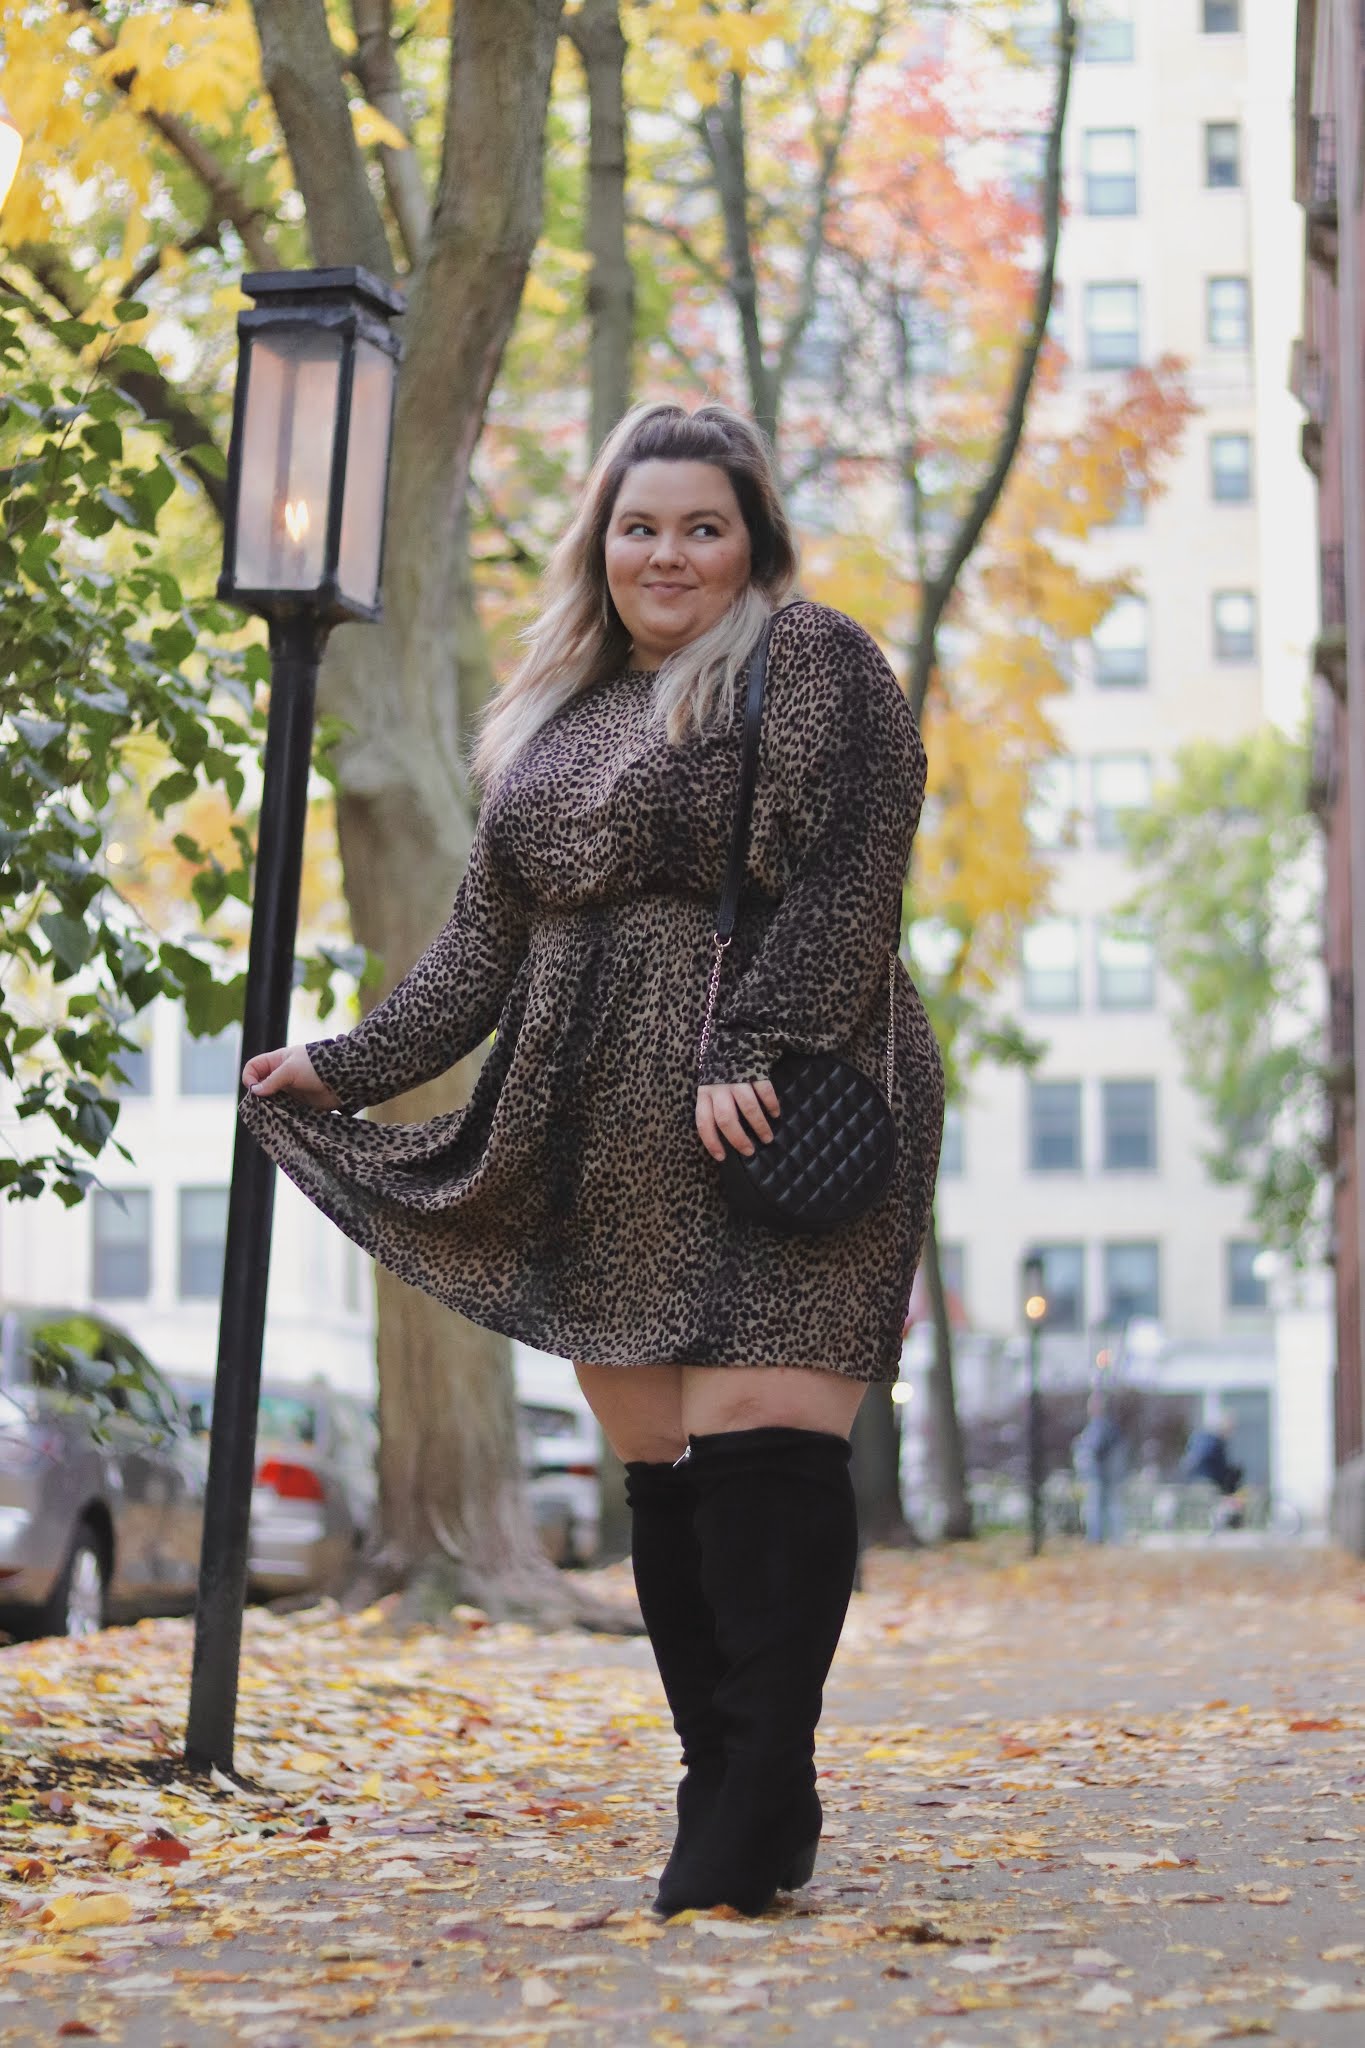 Chicago Plus Size Petite Fashion Blogger Natalie in the City wears plus size dresses and wide calf boots